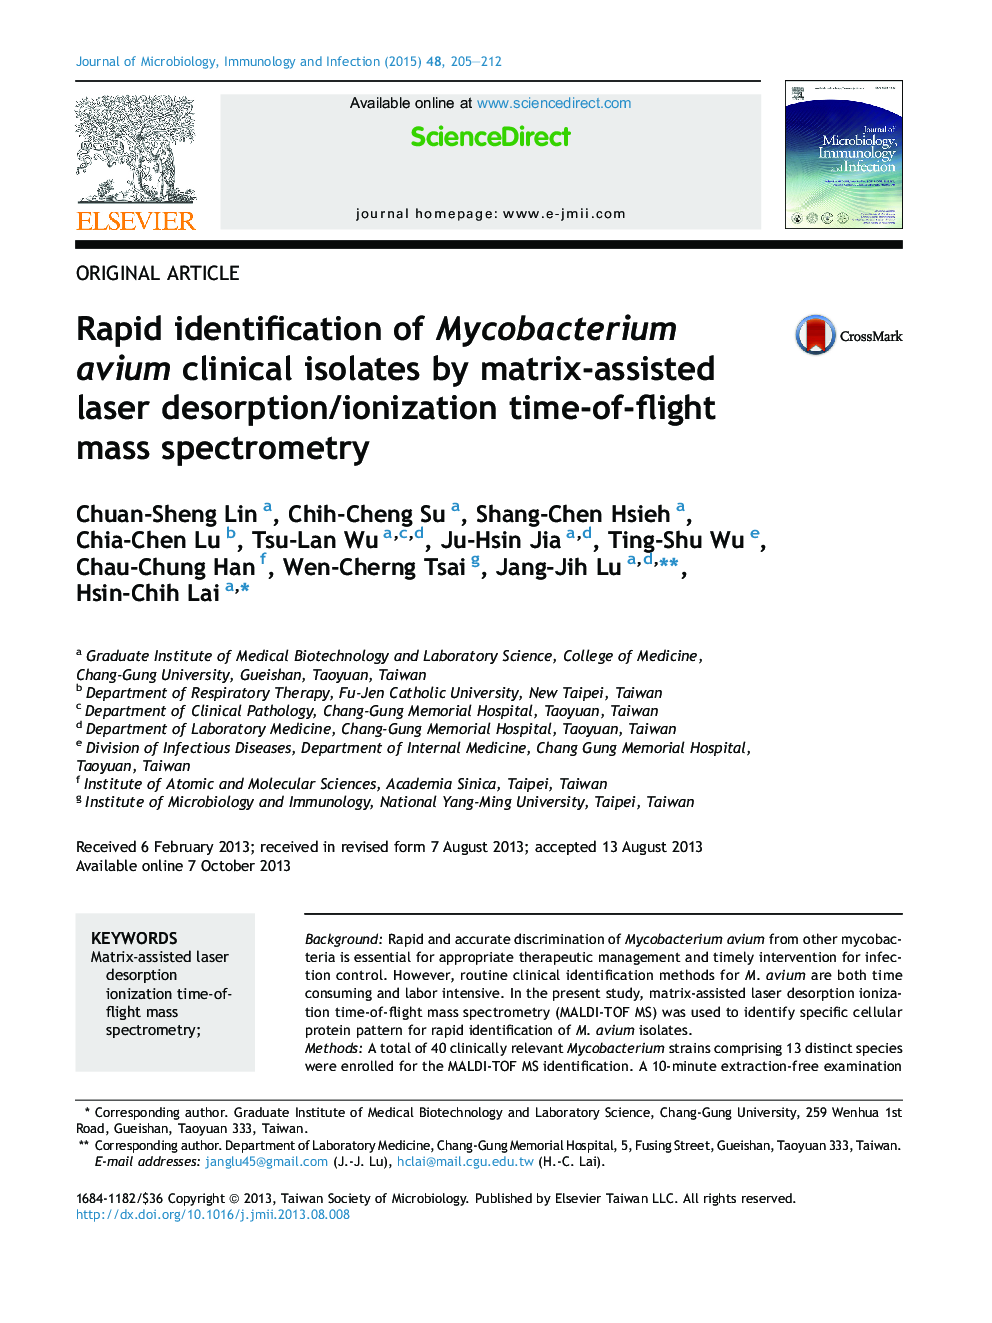 Rapid identification of Mycobacterium avium clinical isolates by matrix-assisted laser desorption/ionization time-of-flight mass spectrometry